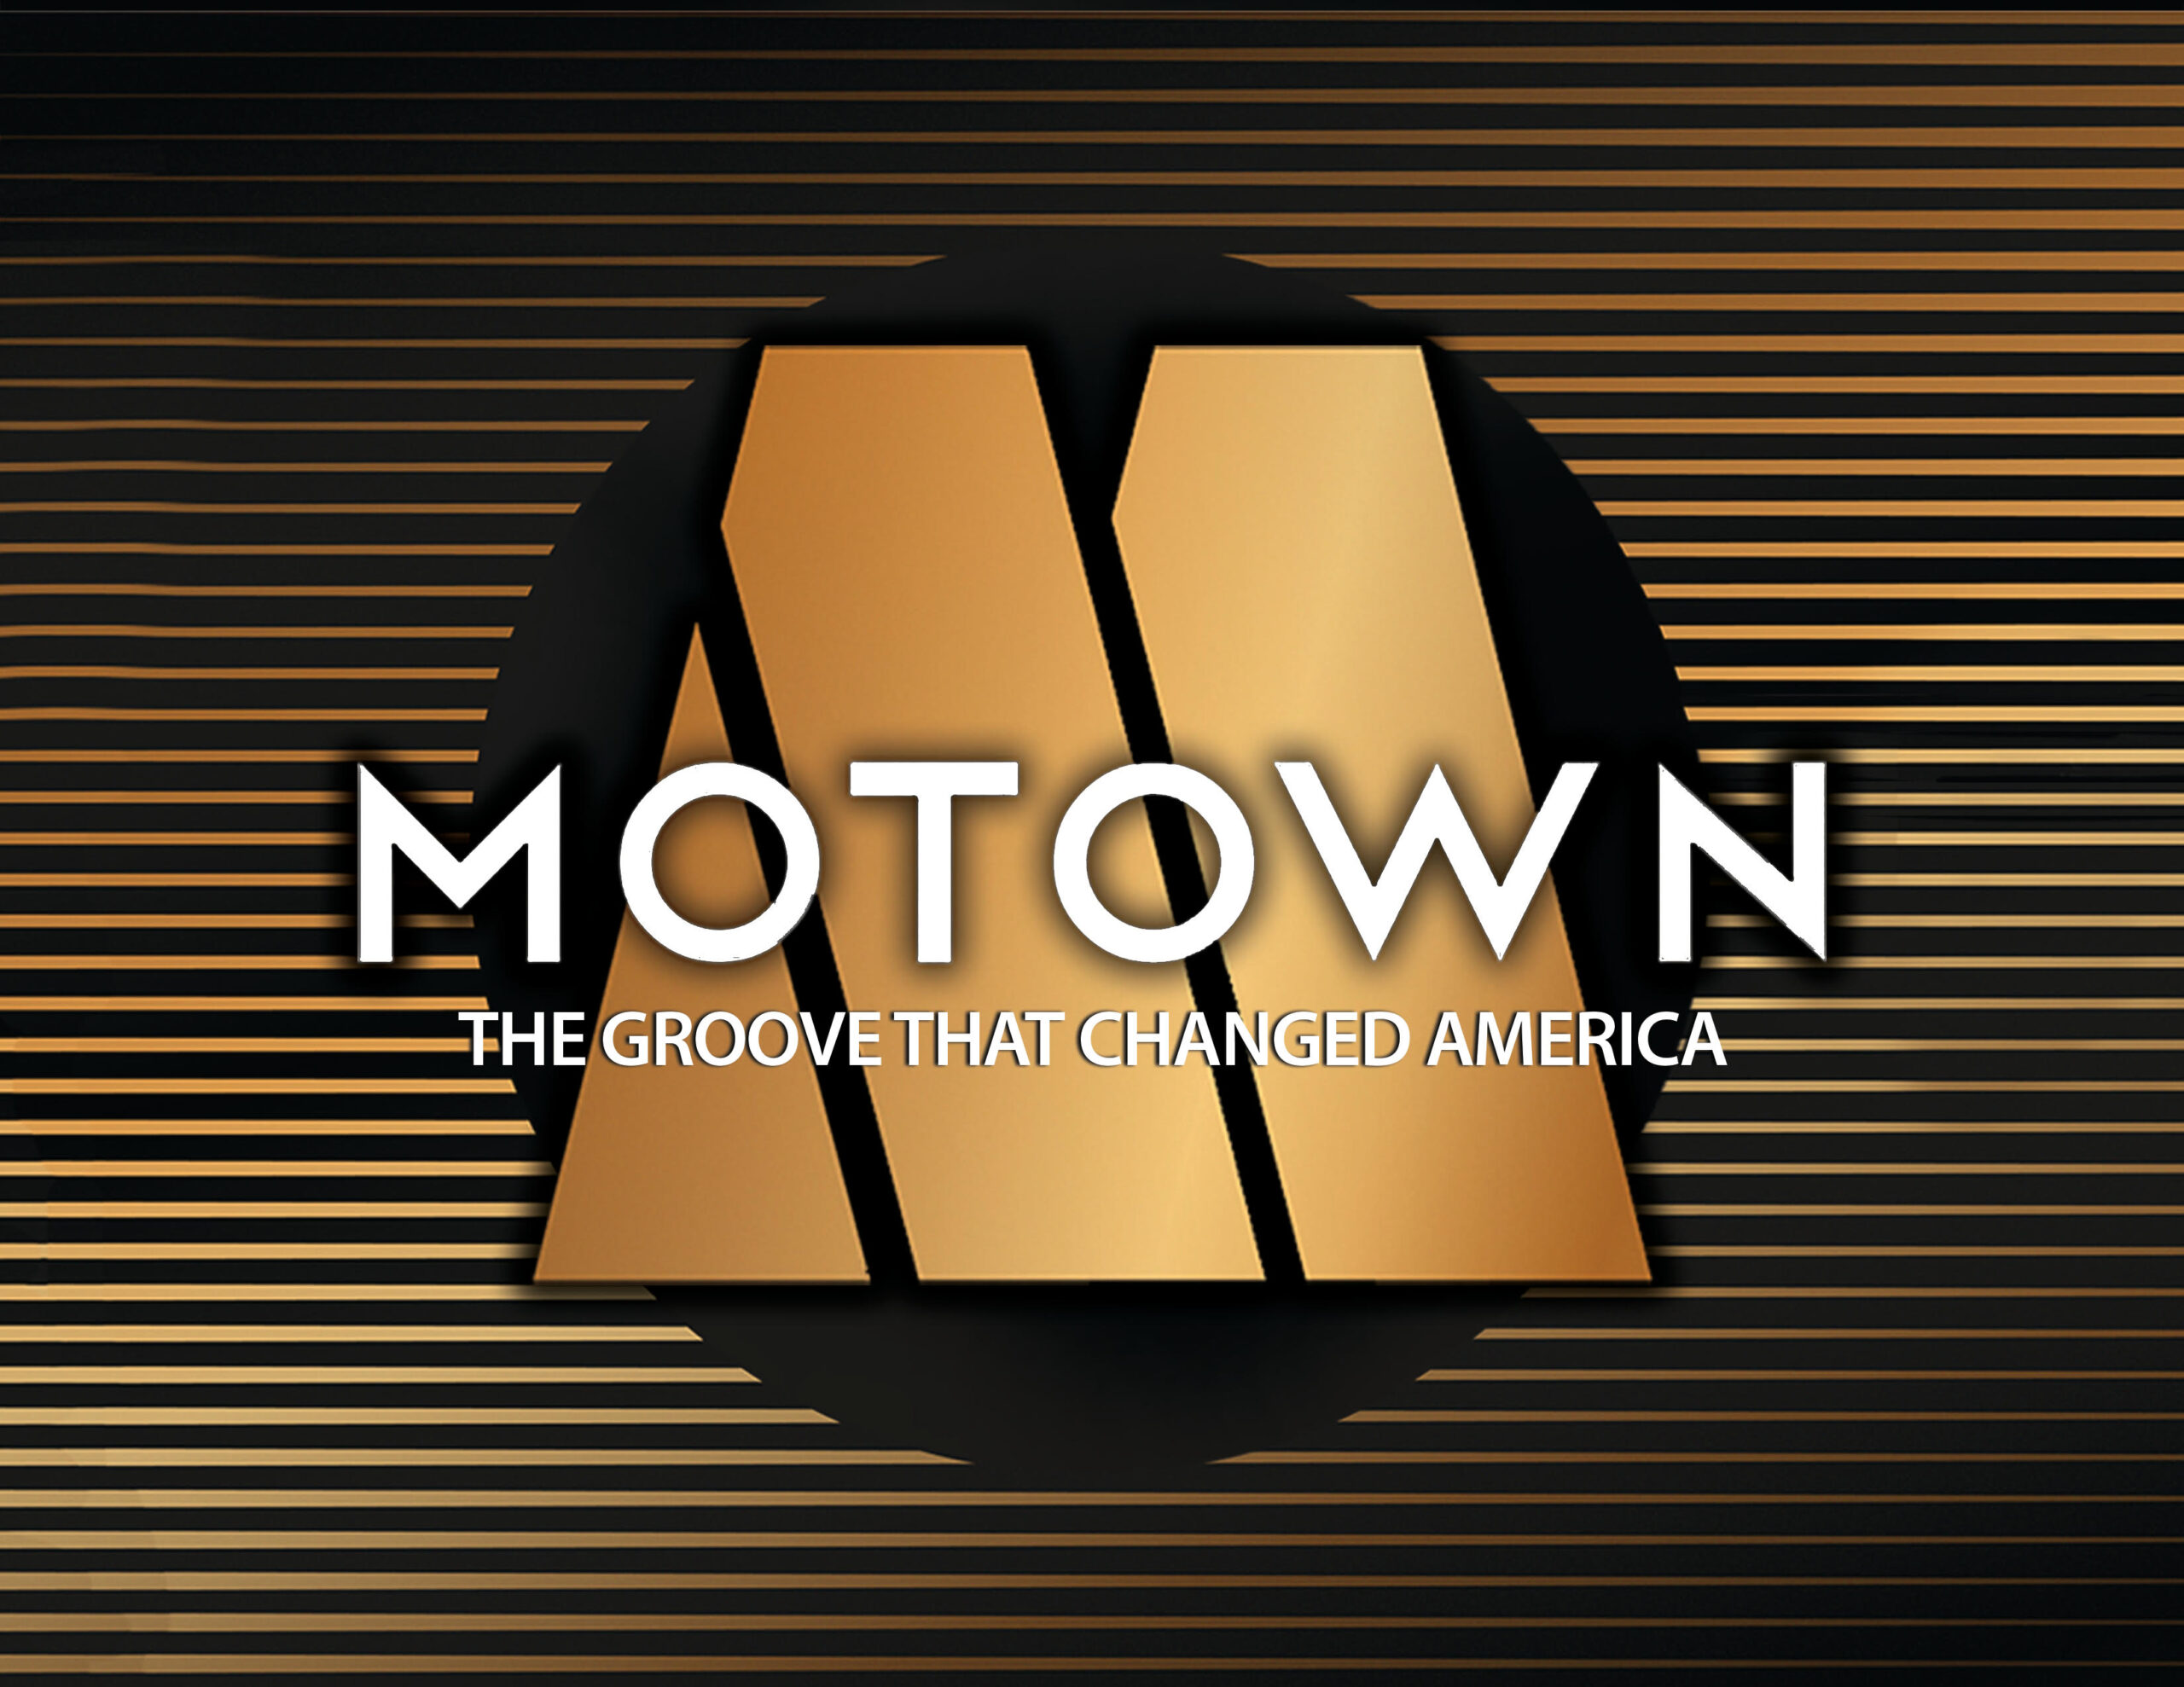 MOTOWN: THE GROOVE THAT CHANGED AMERICA - California Center for the Arts,  Escondido